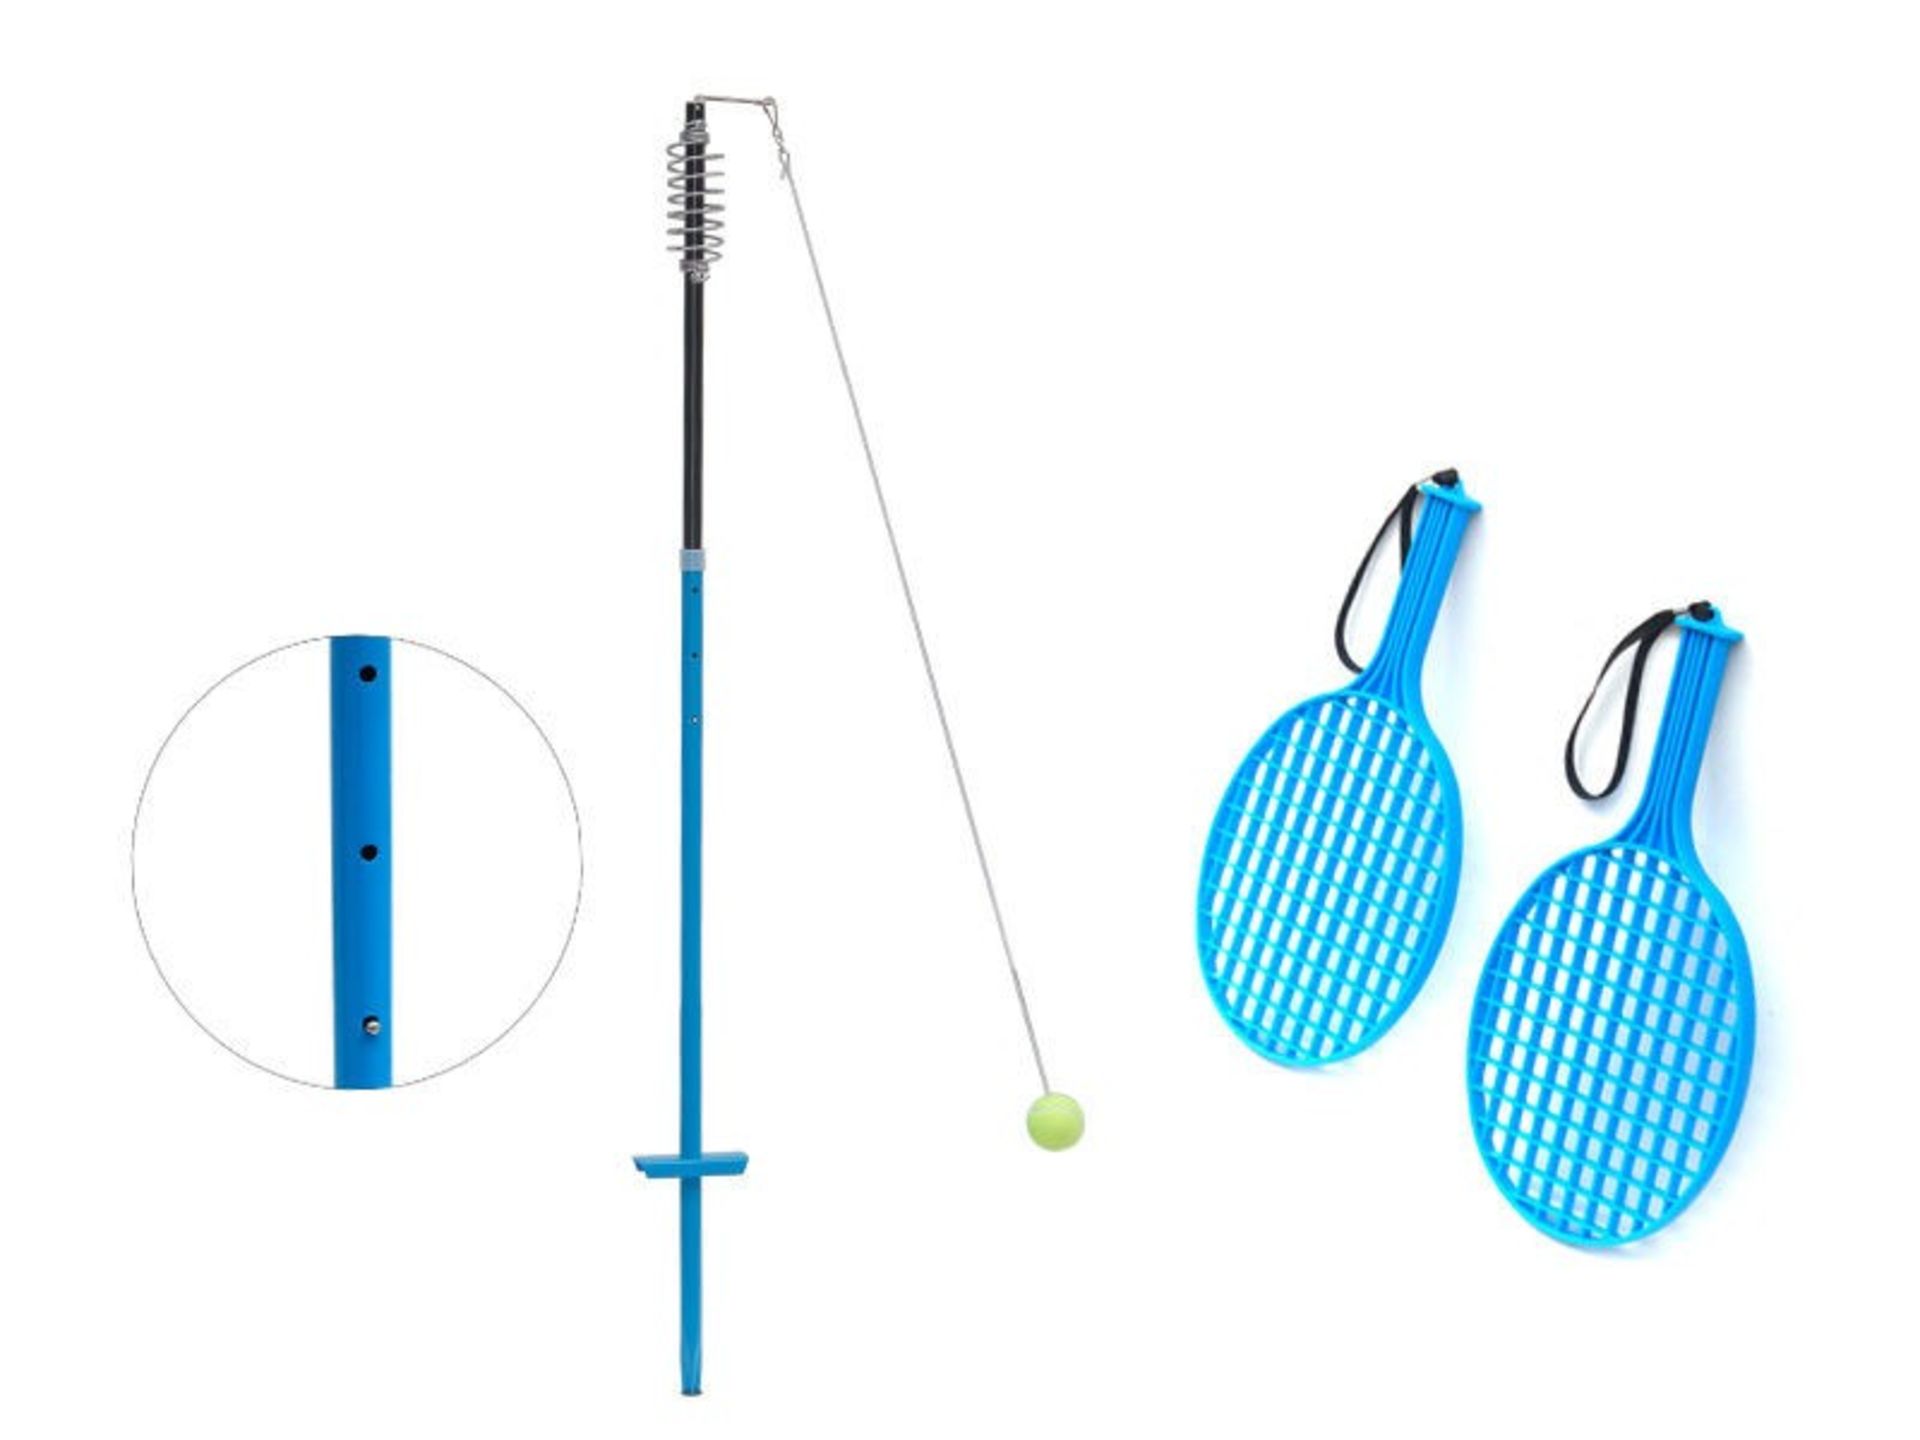 V *TRADE QTY* Brand New Tennis Trainer Set w/Ball and 2 bats in carry bag X 35 YOUR BID PRICE TO